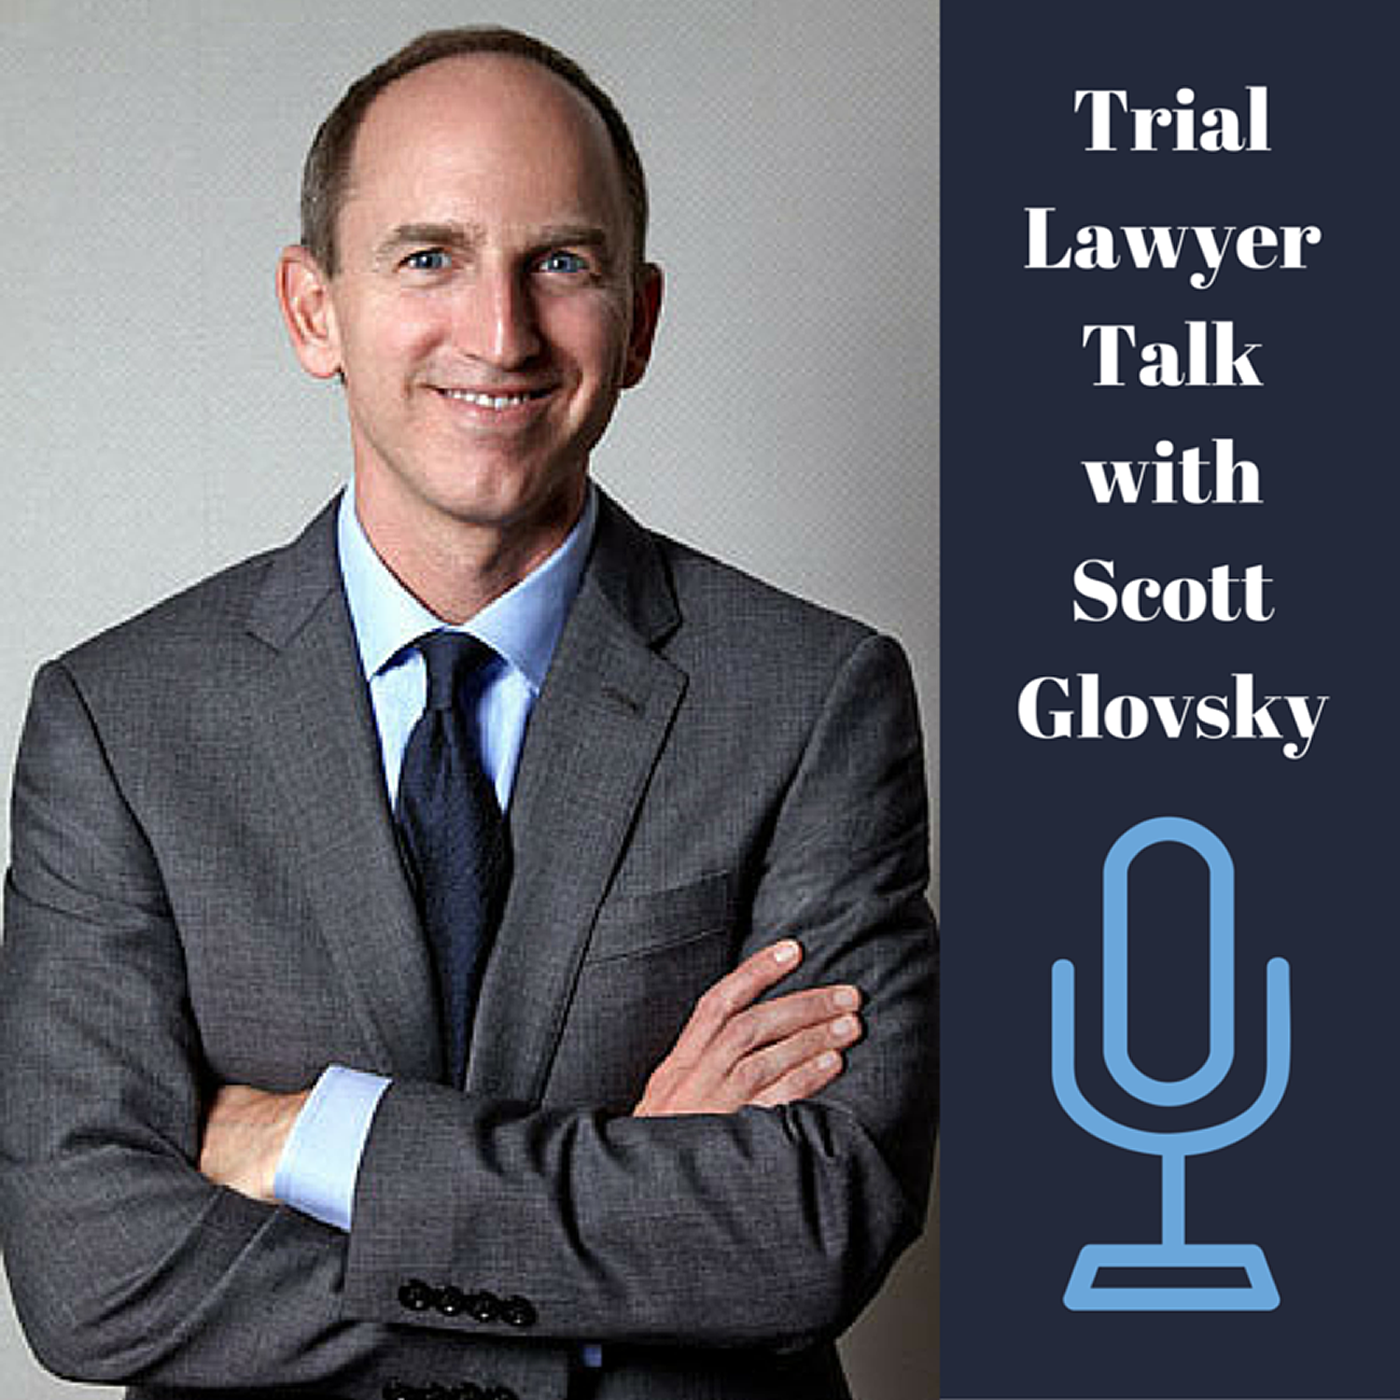 A highlight from Trial Lawyer Talk, Episode 66, with Jim Leach